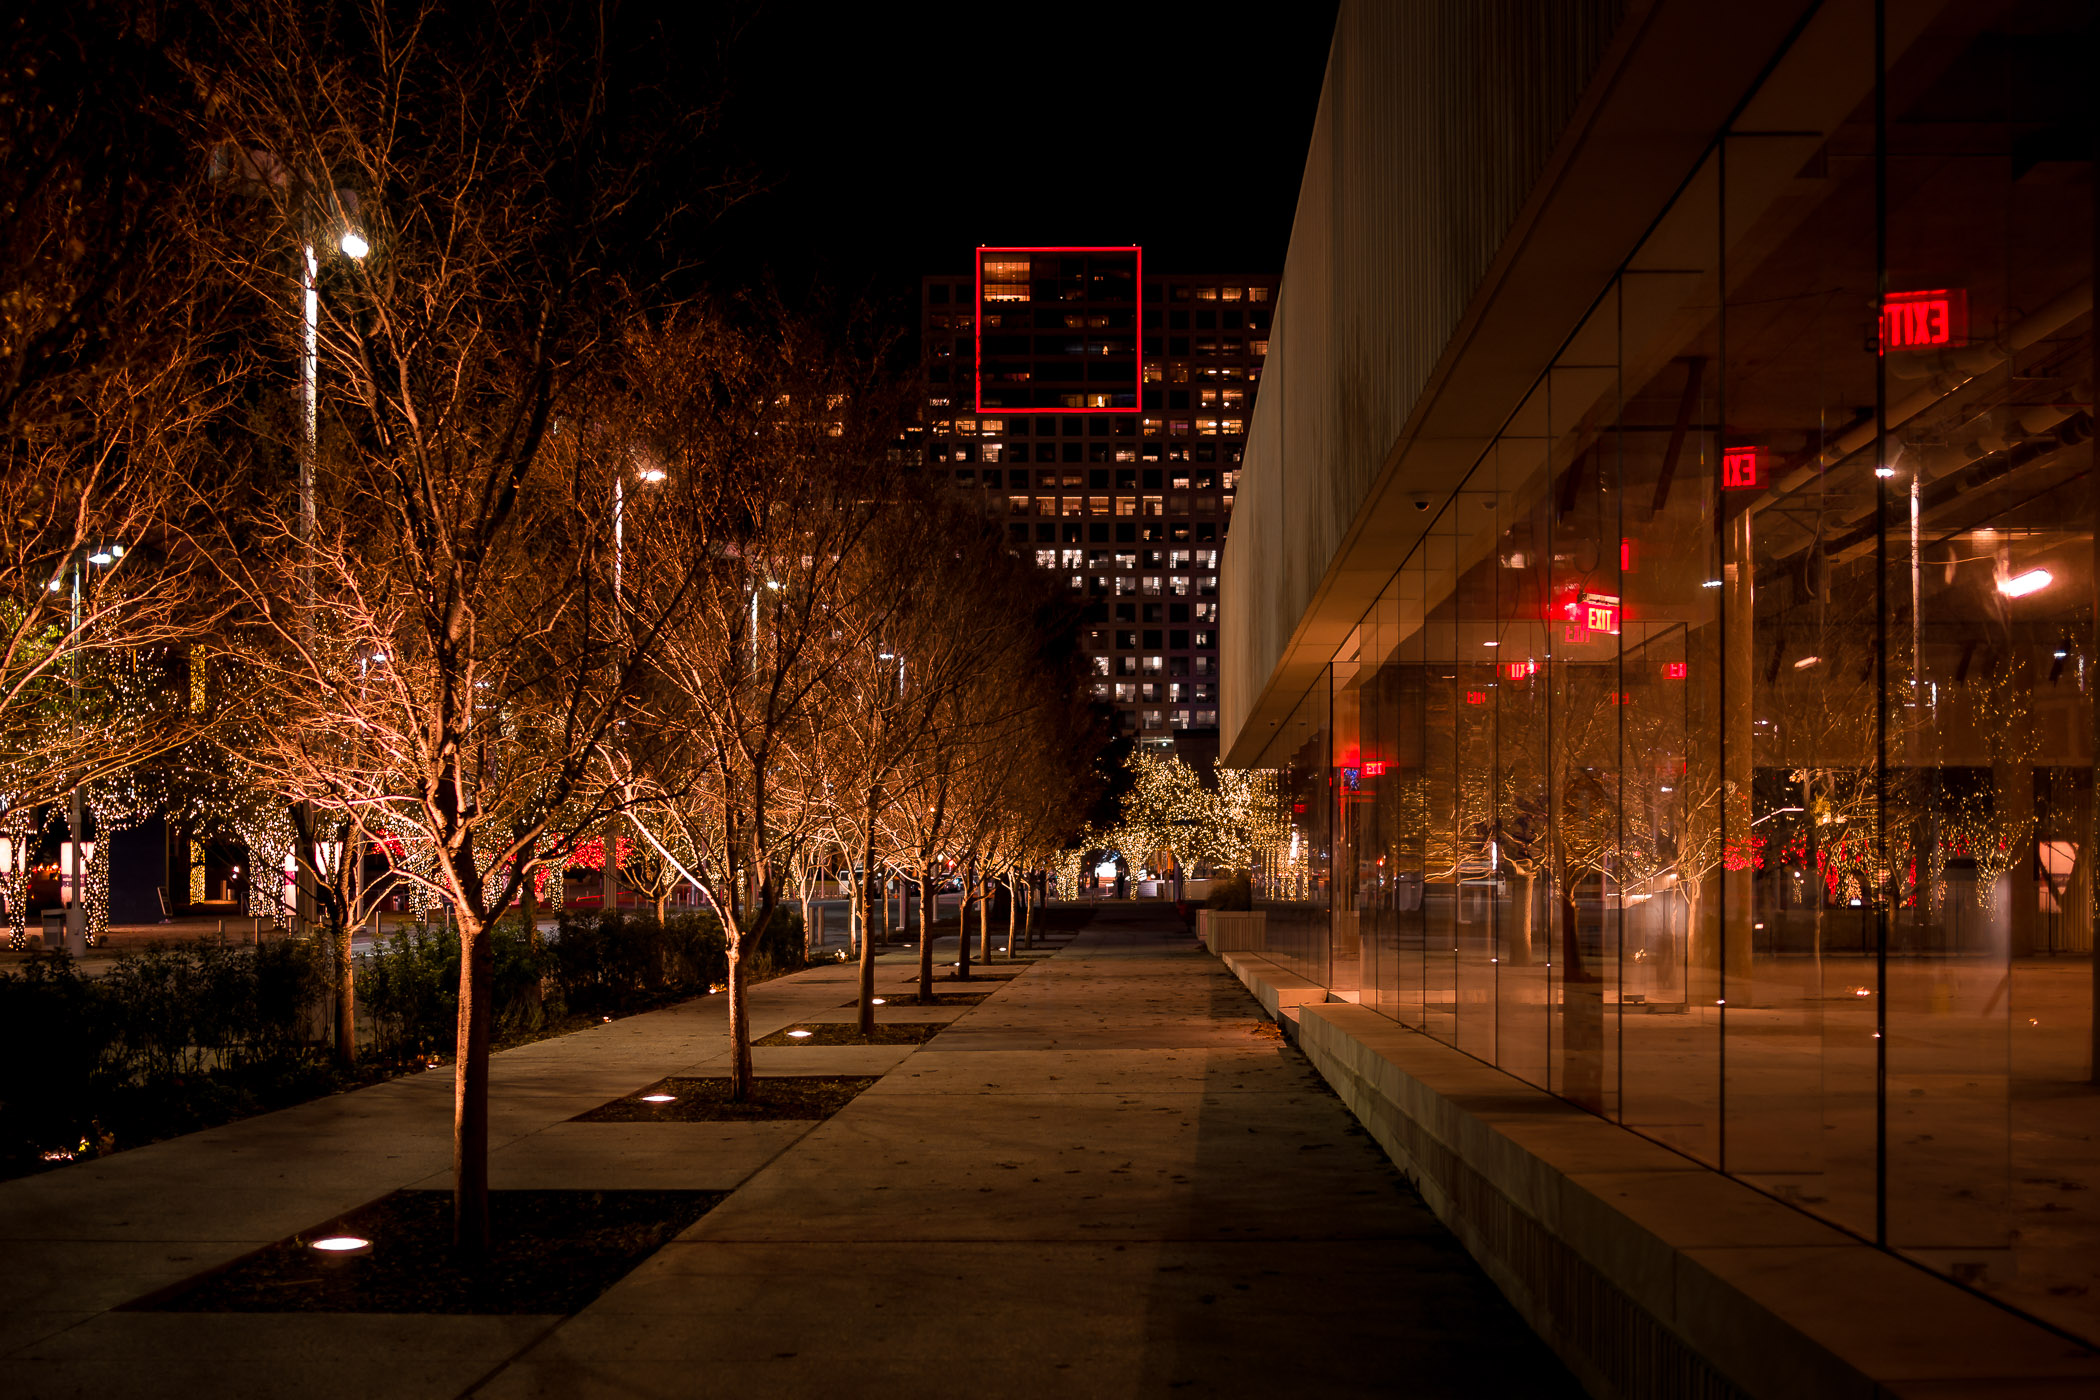 The Dallas Arts District's One Arts Plaza as seen from a sidewalk adjacent to the nearby HALL Arts.